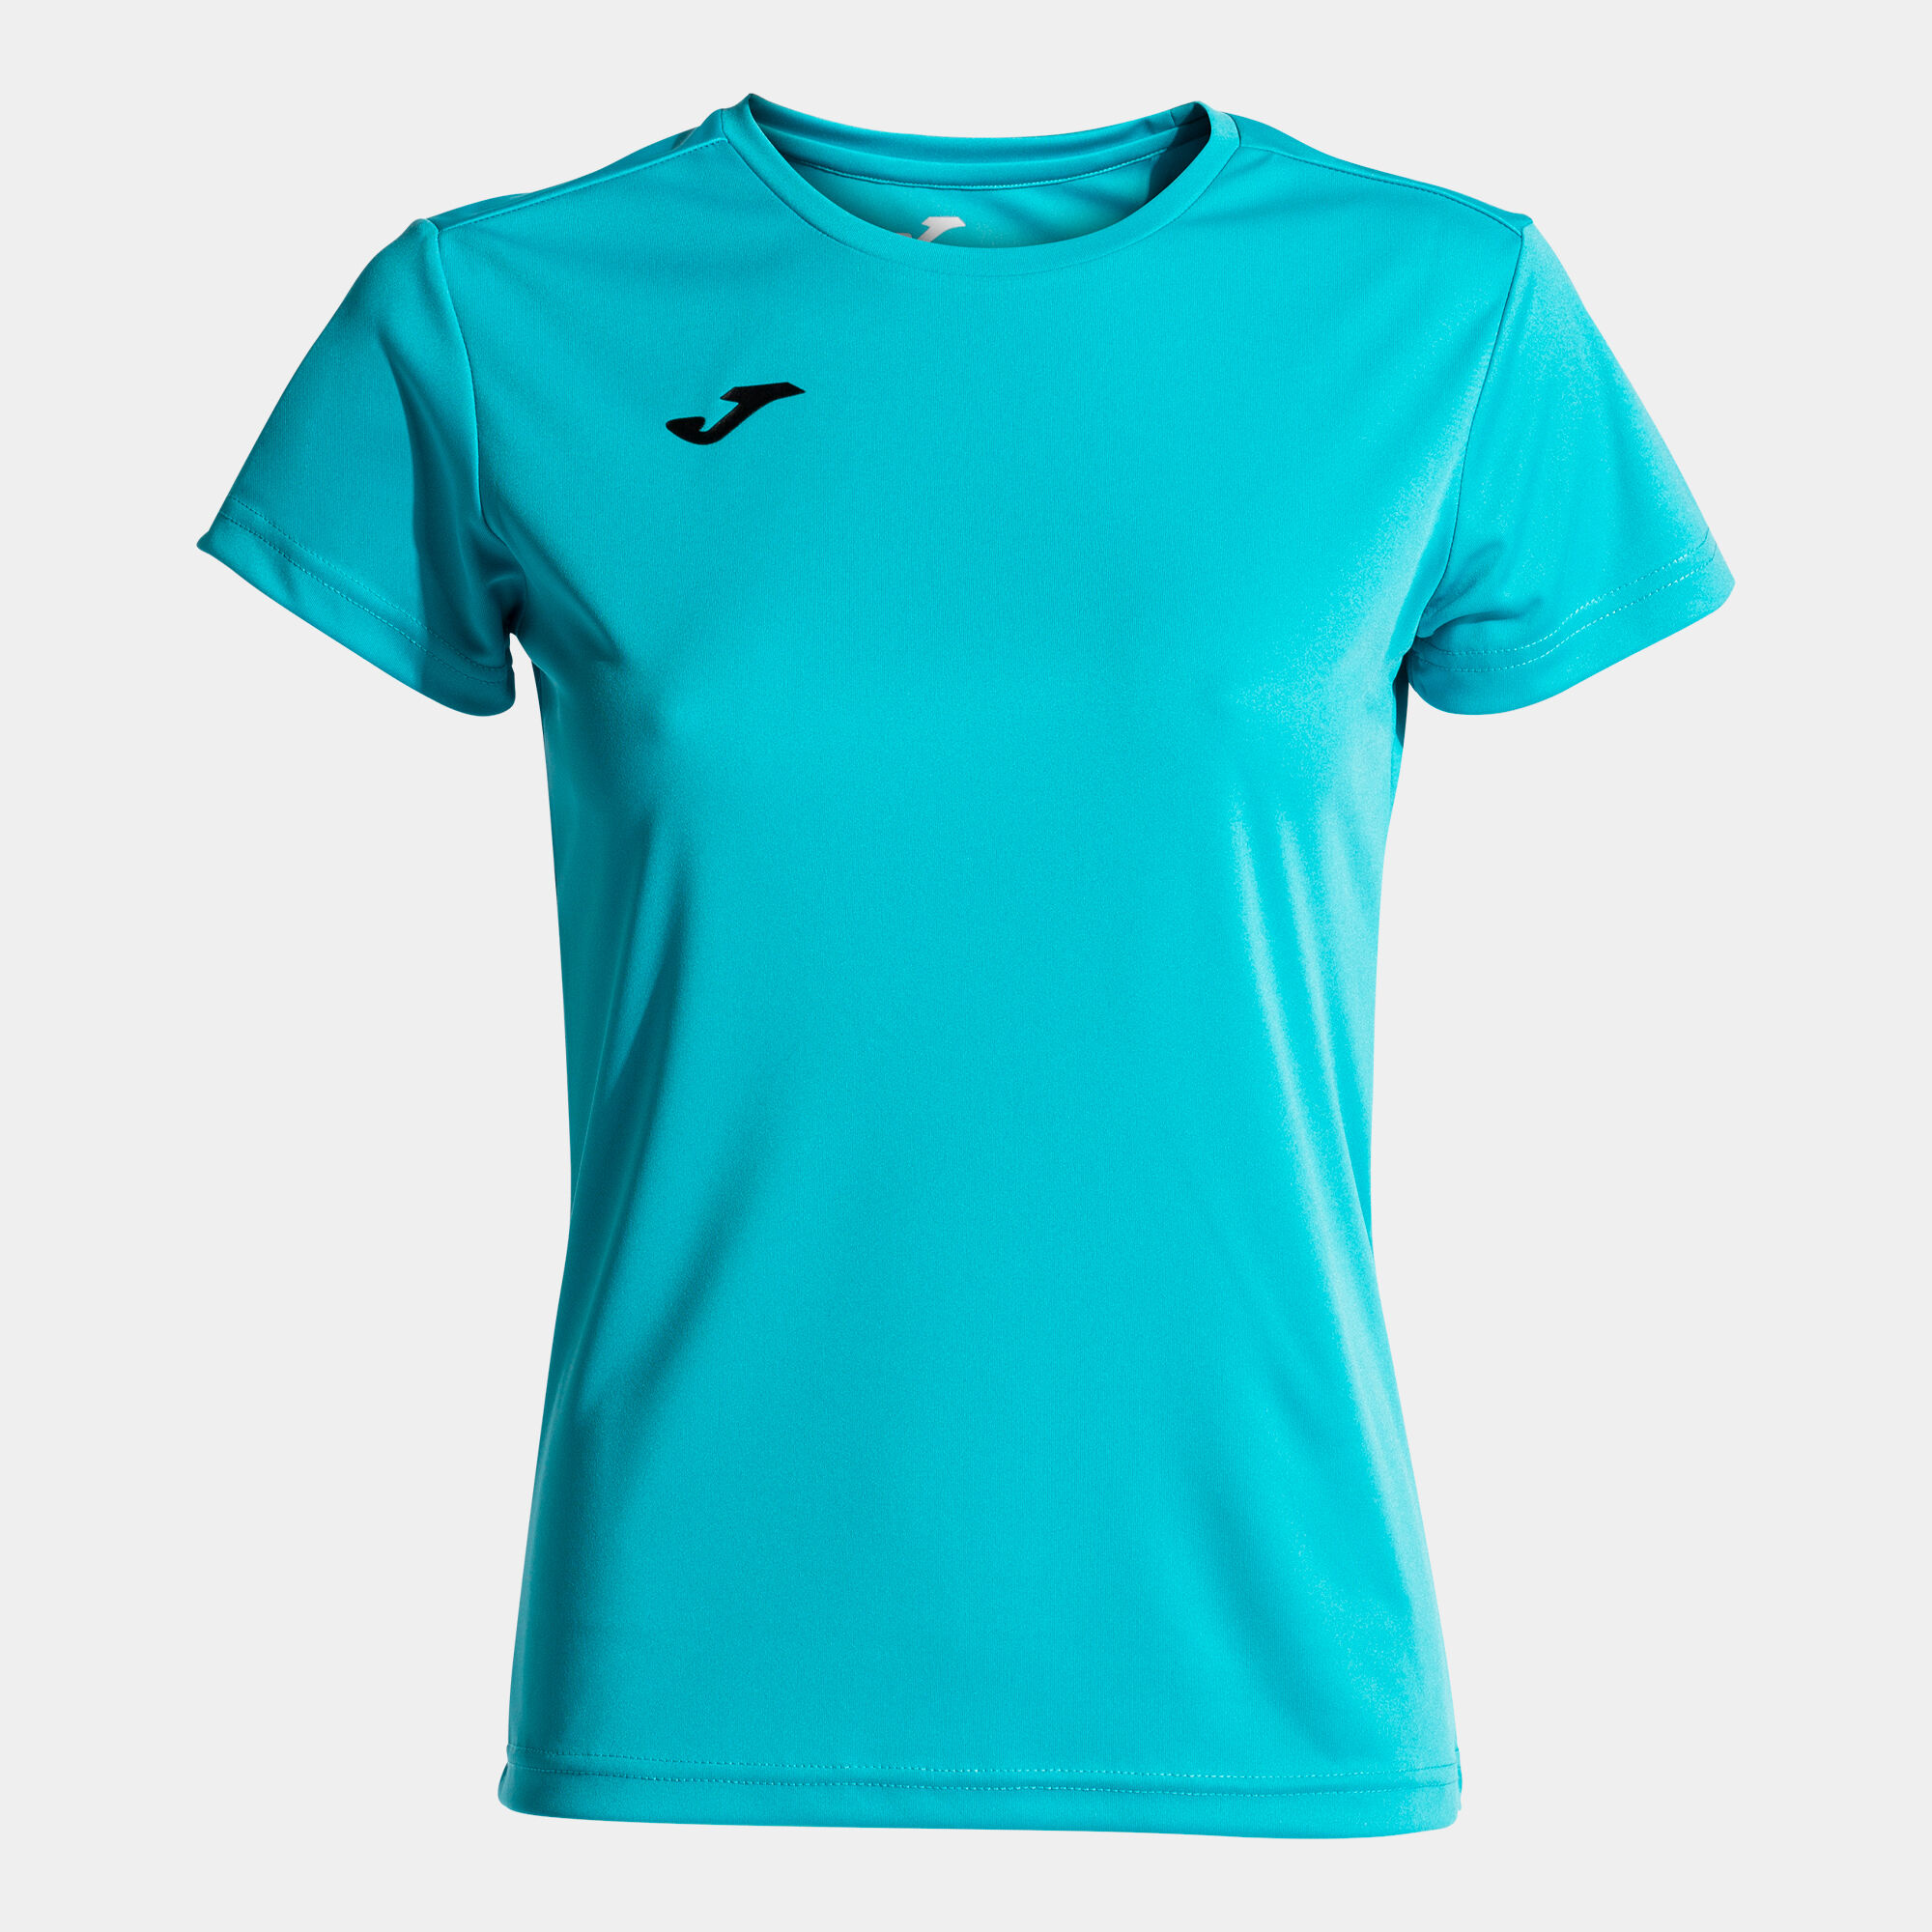 Maillot manches courtes femme Combi turquoise fluo